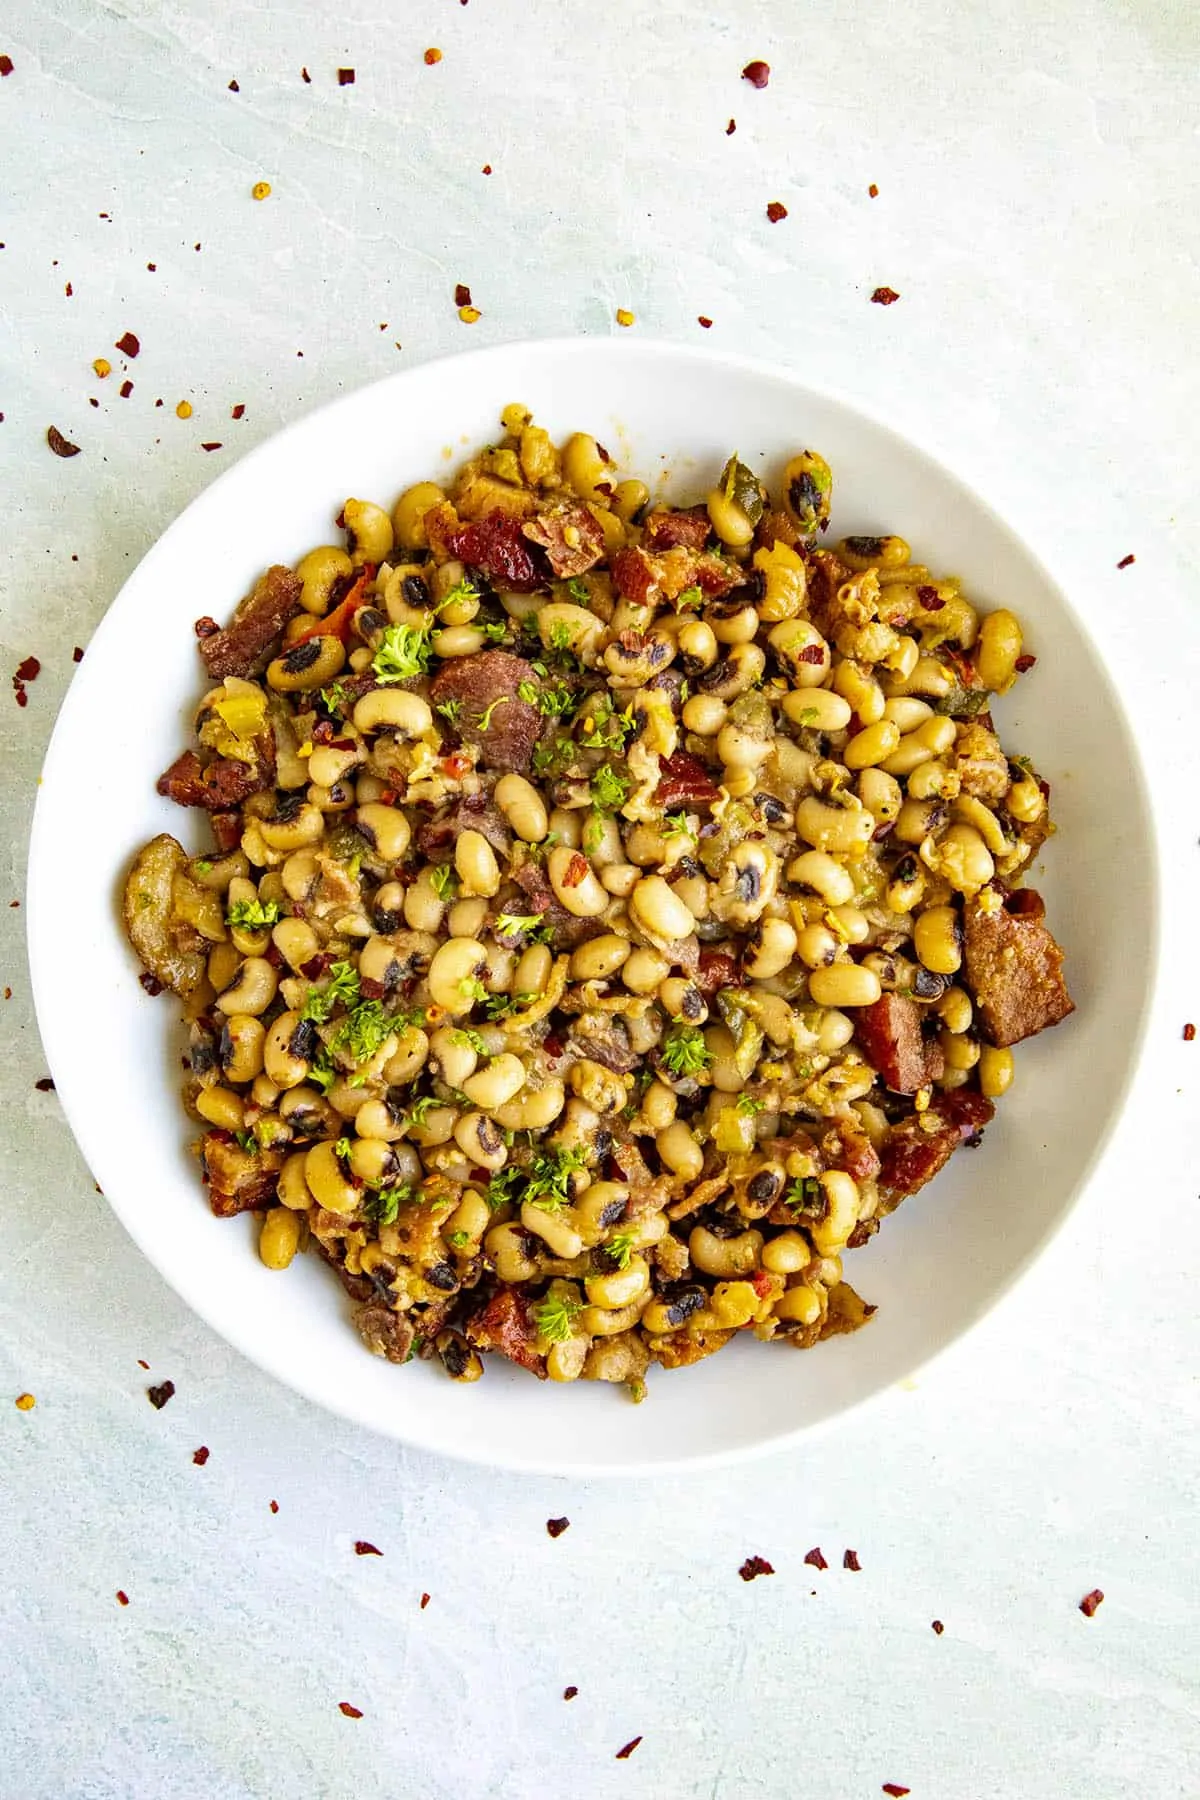 Delicious Black Eyed Peas in a bowl